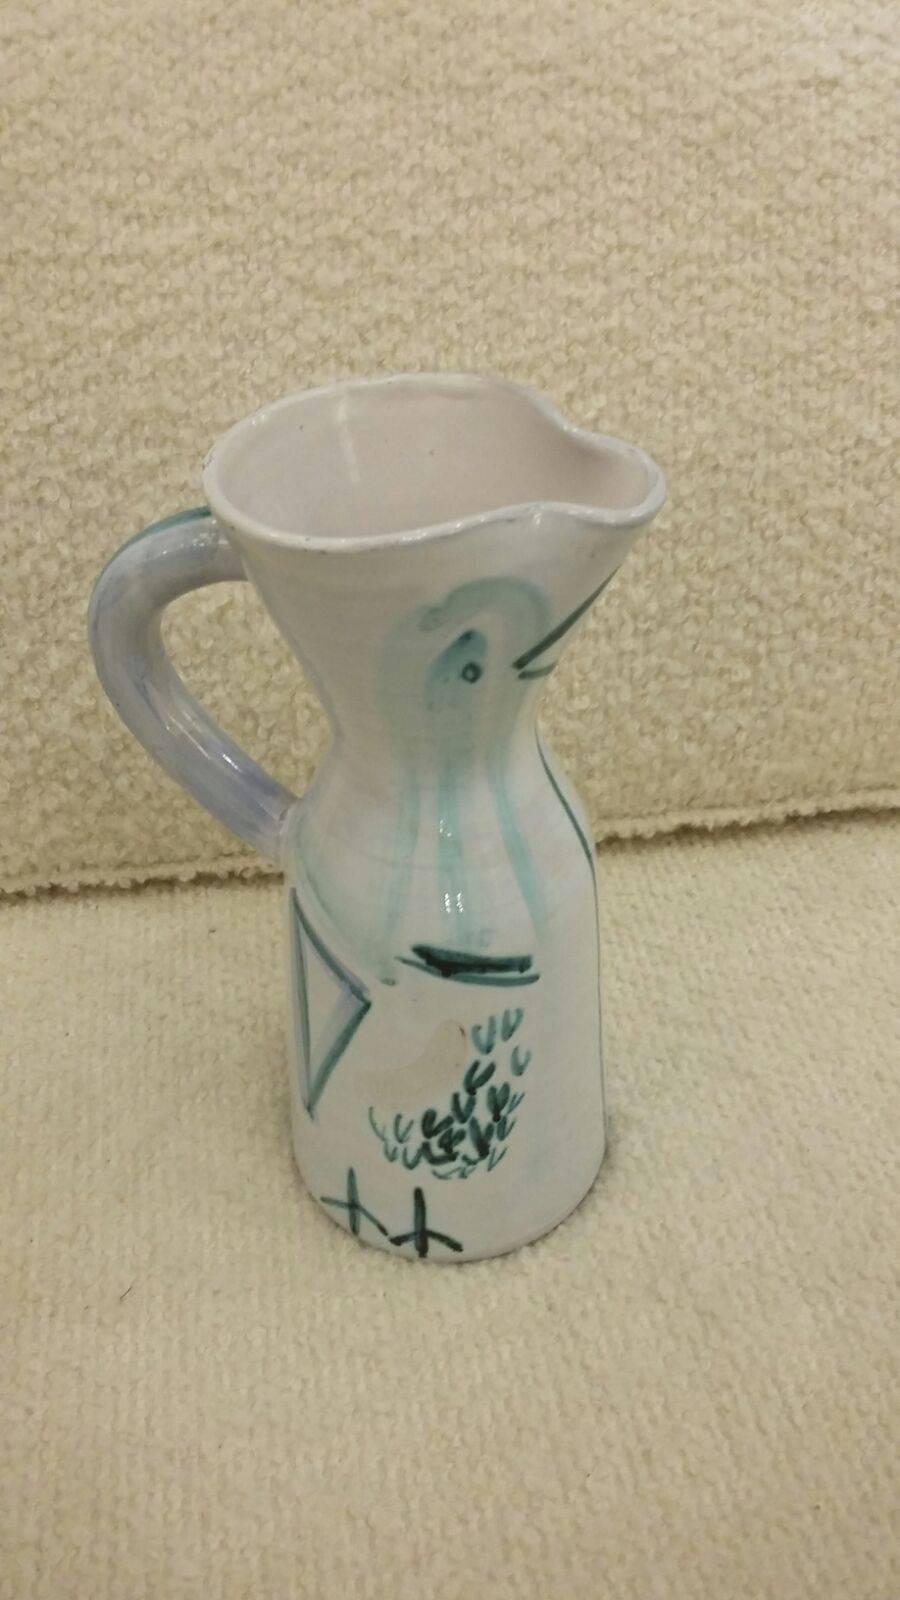 Beautiful Jacques Innocenti ceramic pitcher, Vallauris, circa 1960, signed,
in excellent condition
Measures: H 29 cm, D 12 cm, L with pitcher's handle 20 cm.